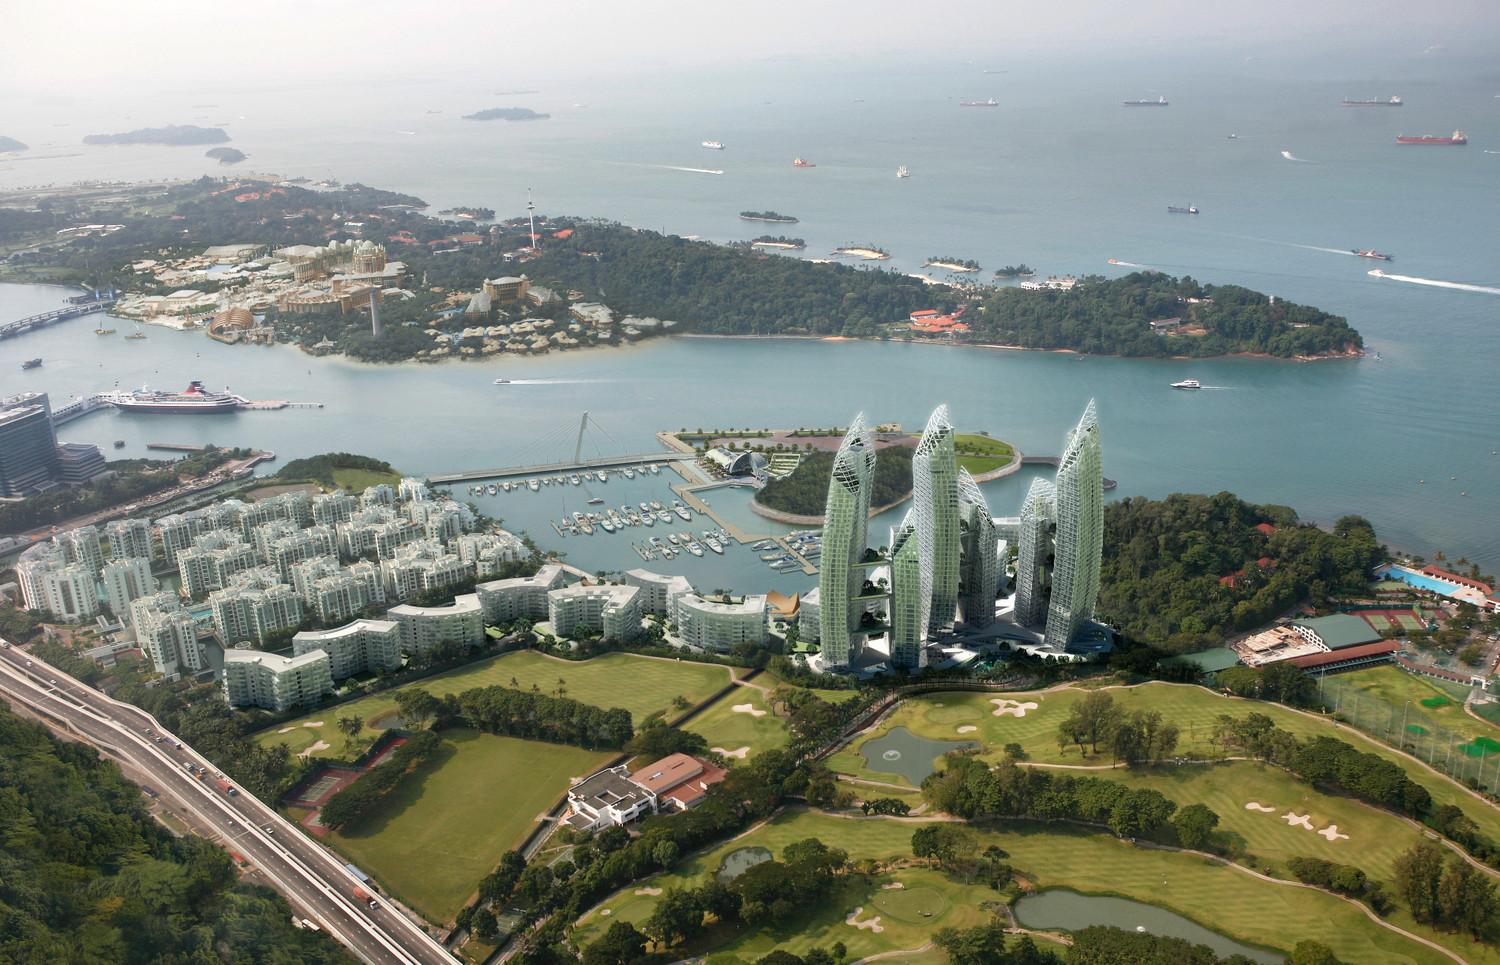 Aerial view, the design of Reflections at Keppel Bay created a landmark at Singapore’s southern city precinct even while safeguarding historical and permanent significant view corridors for neighbours living in its vicinity